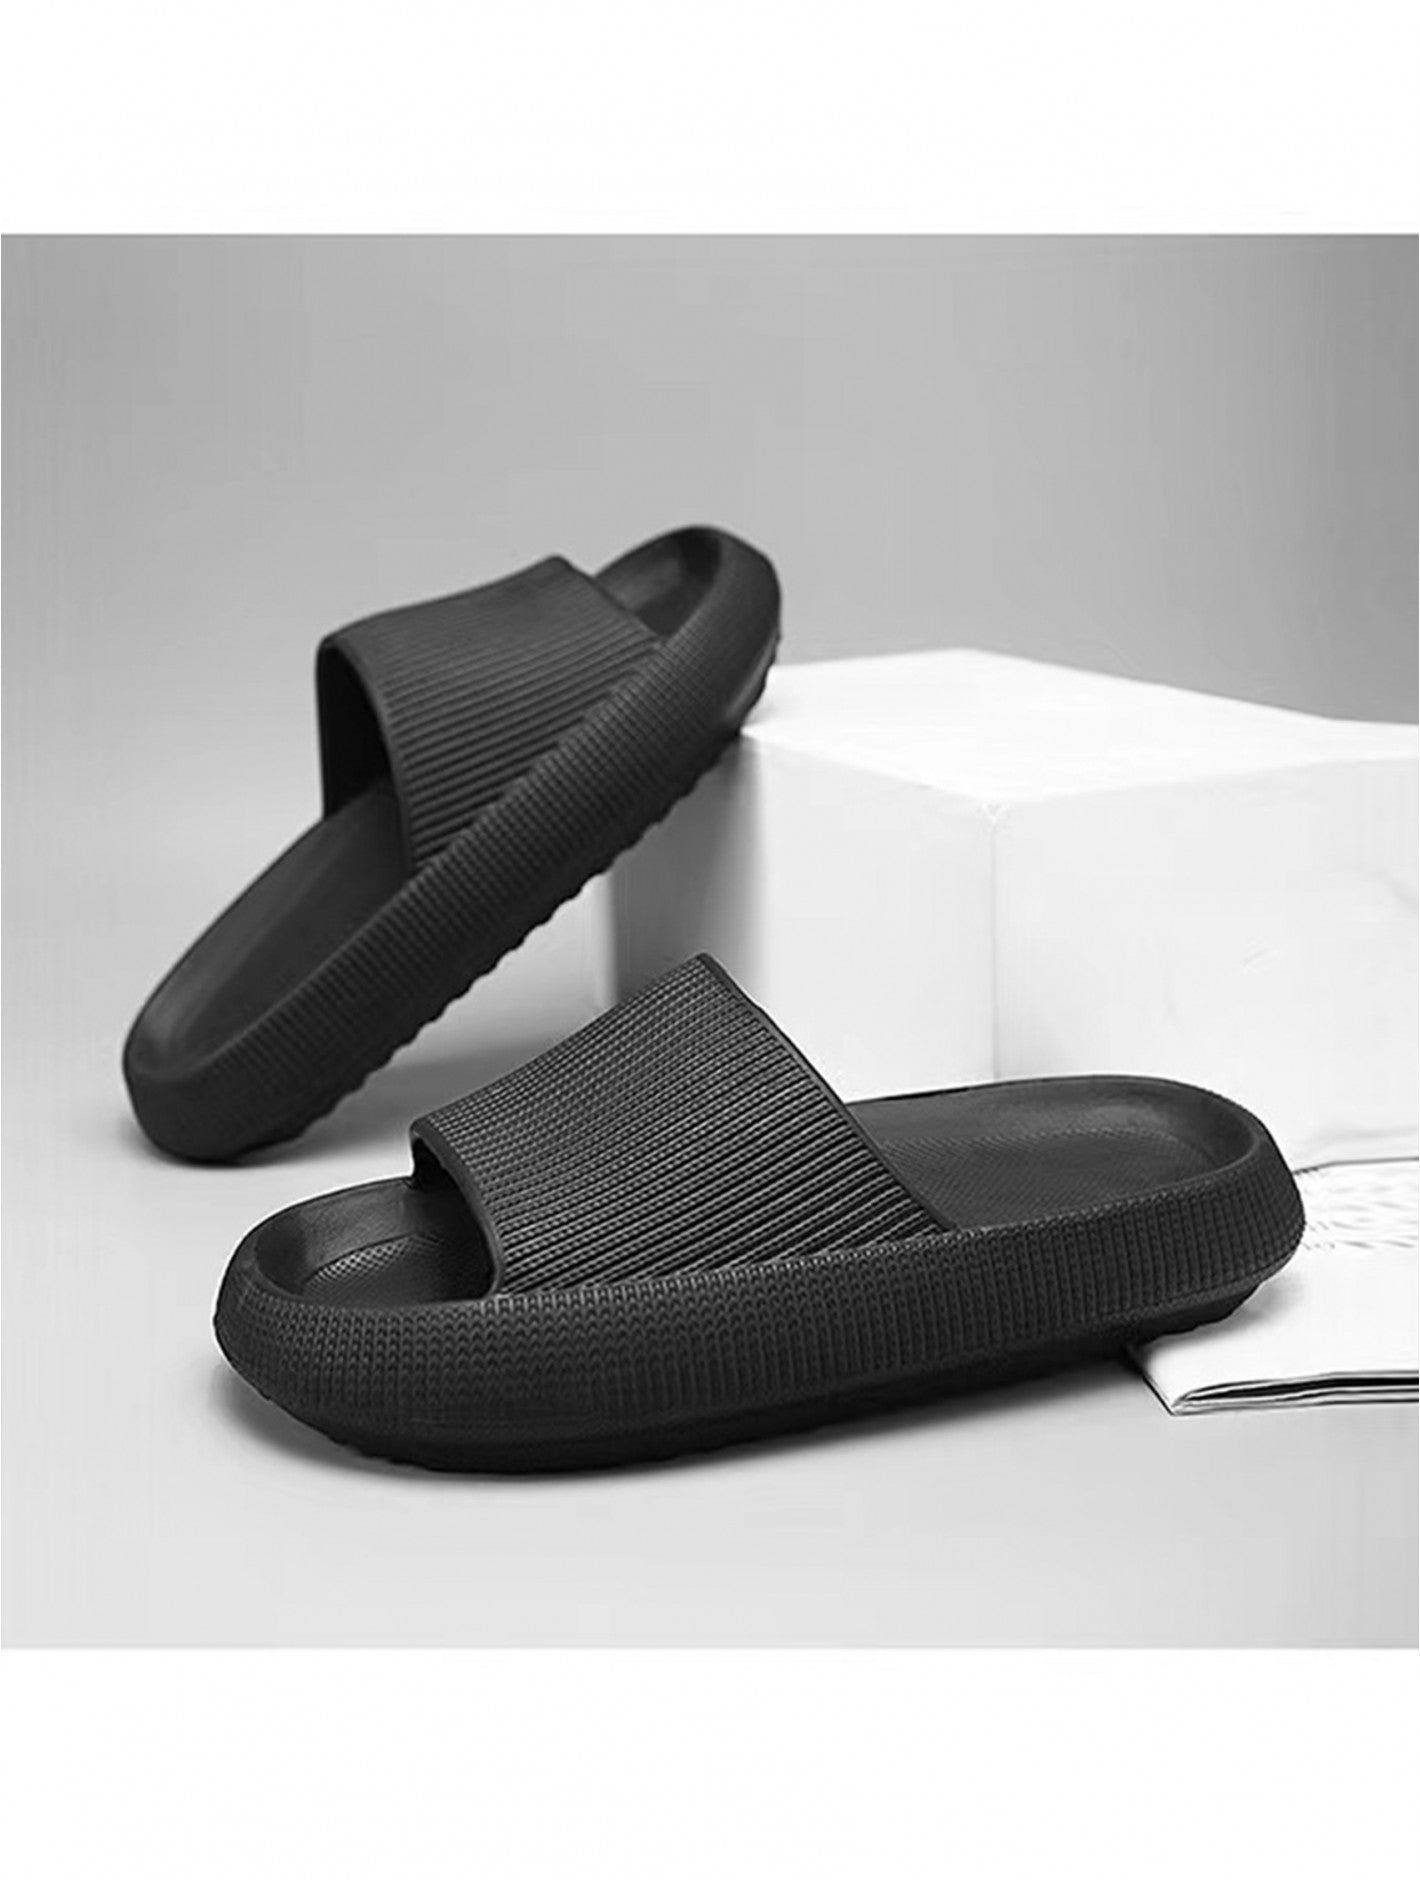 Thick & Soft Soled Women's Sandals